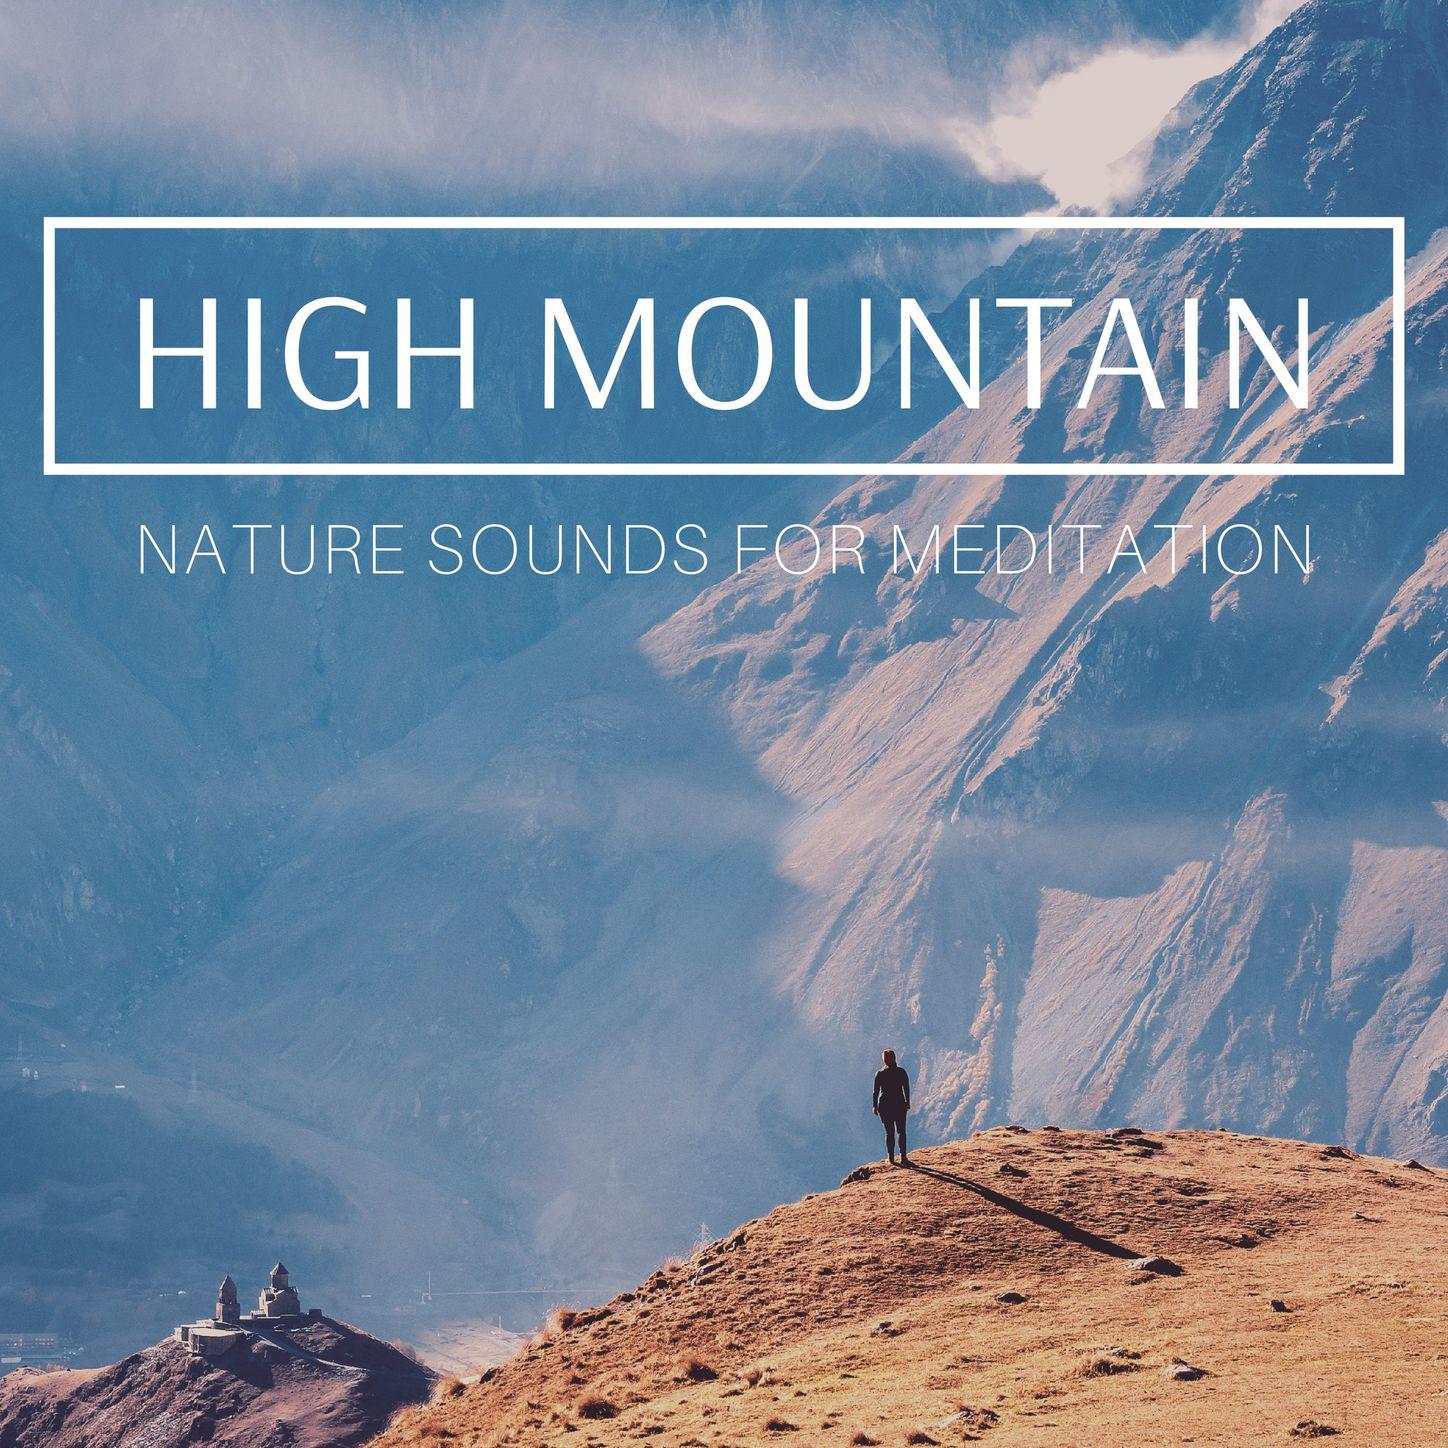 High Mountain: Nature Sounds for Meditation